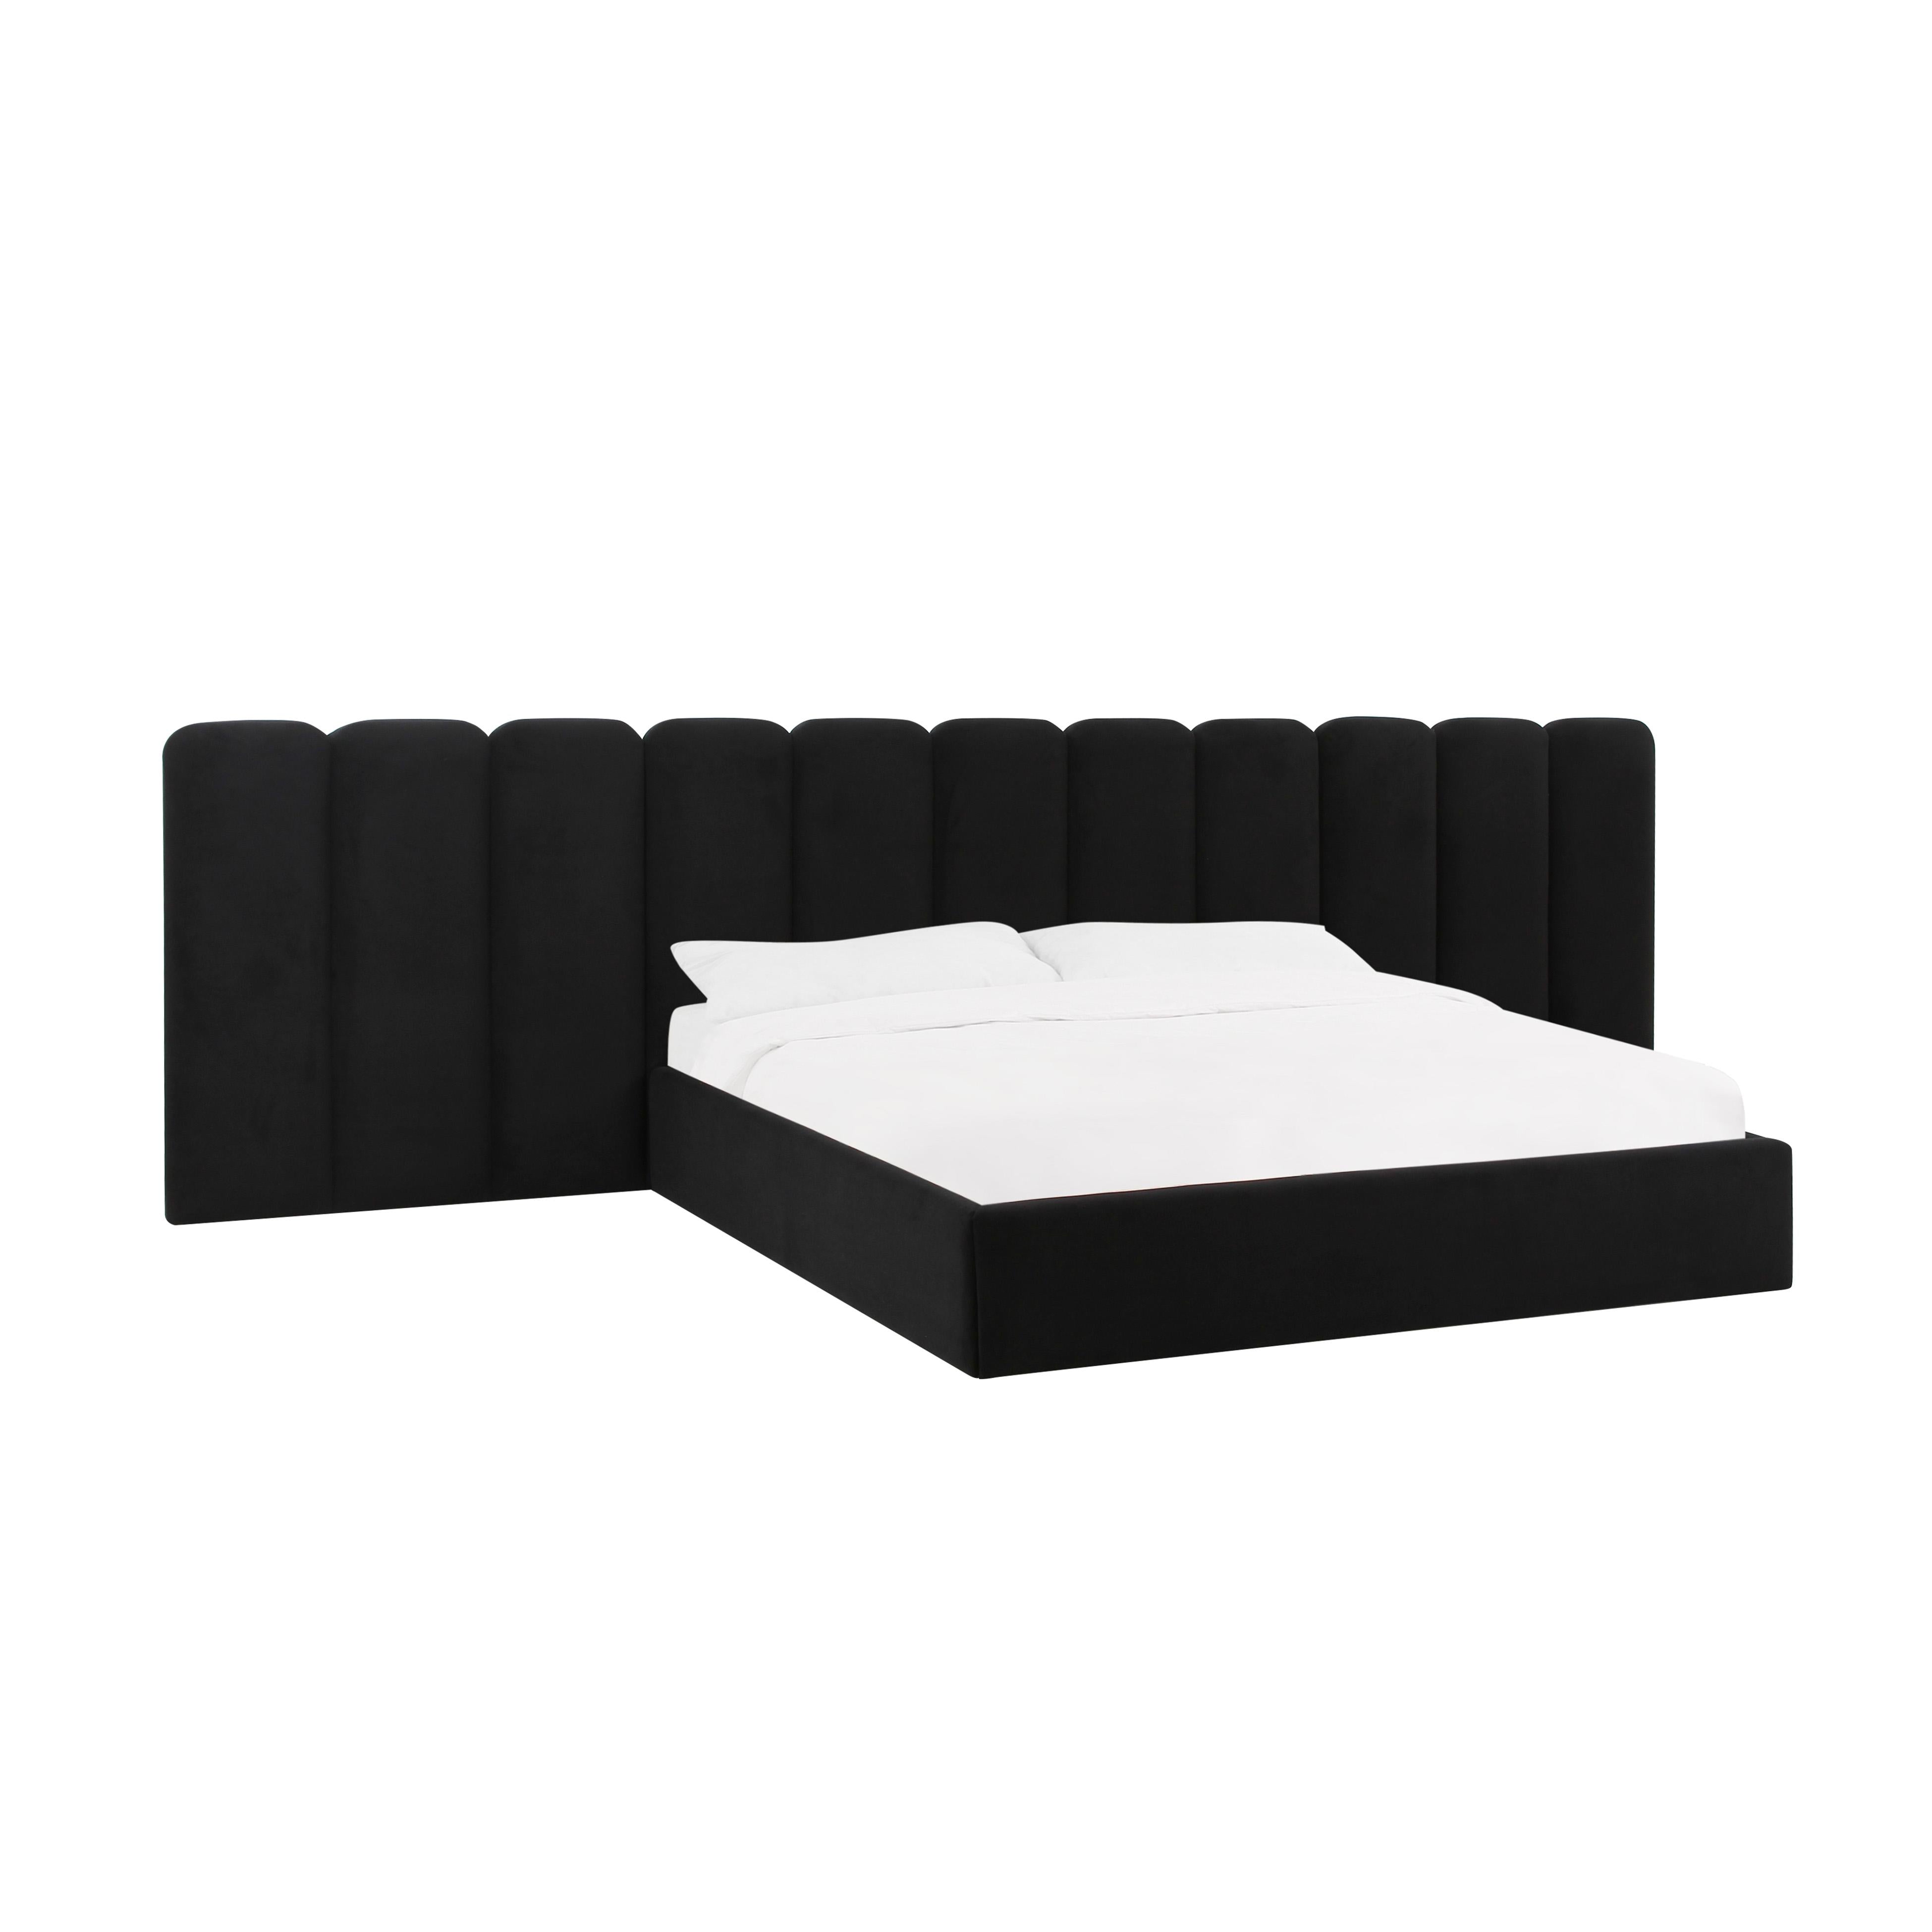 Tov Furniture Beds - Palani Black Velvet Queen Bed with Wings